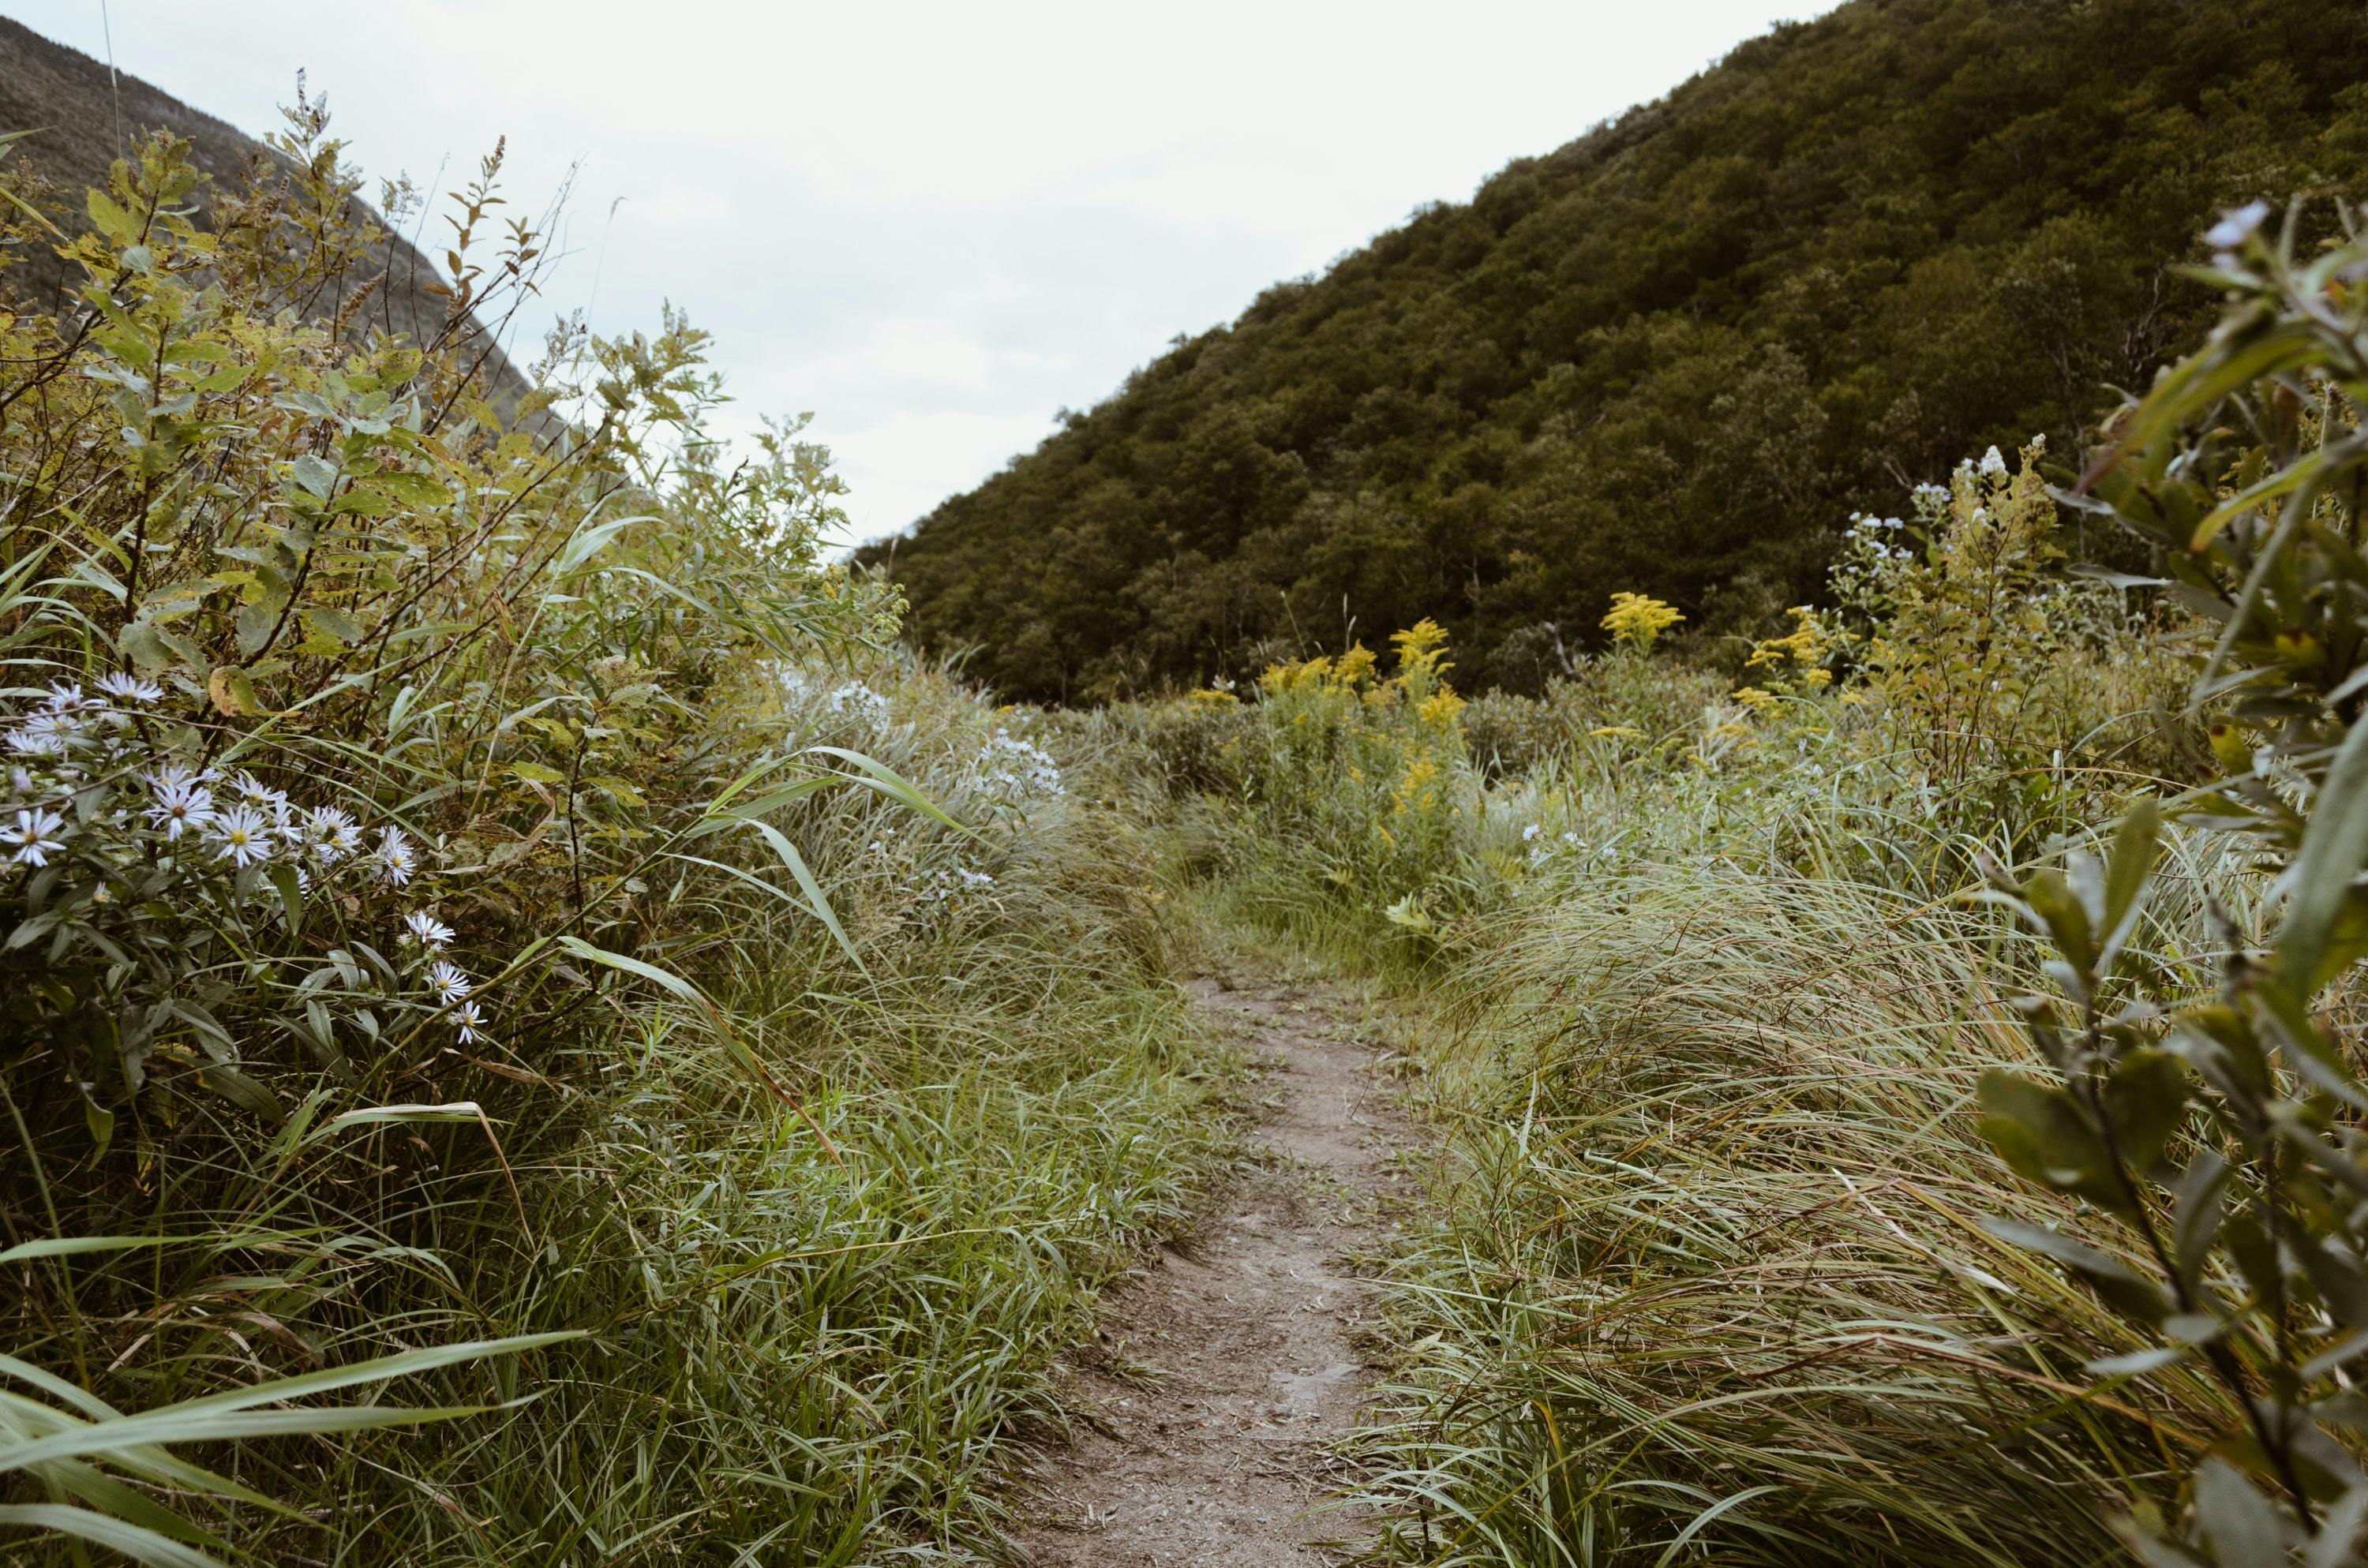 A trail goes through tall wildflowers with hills in the background.